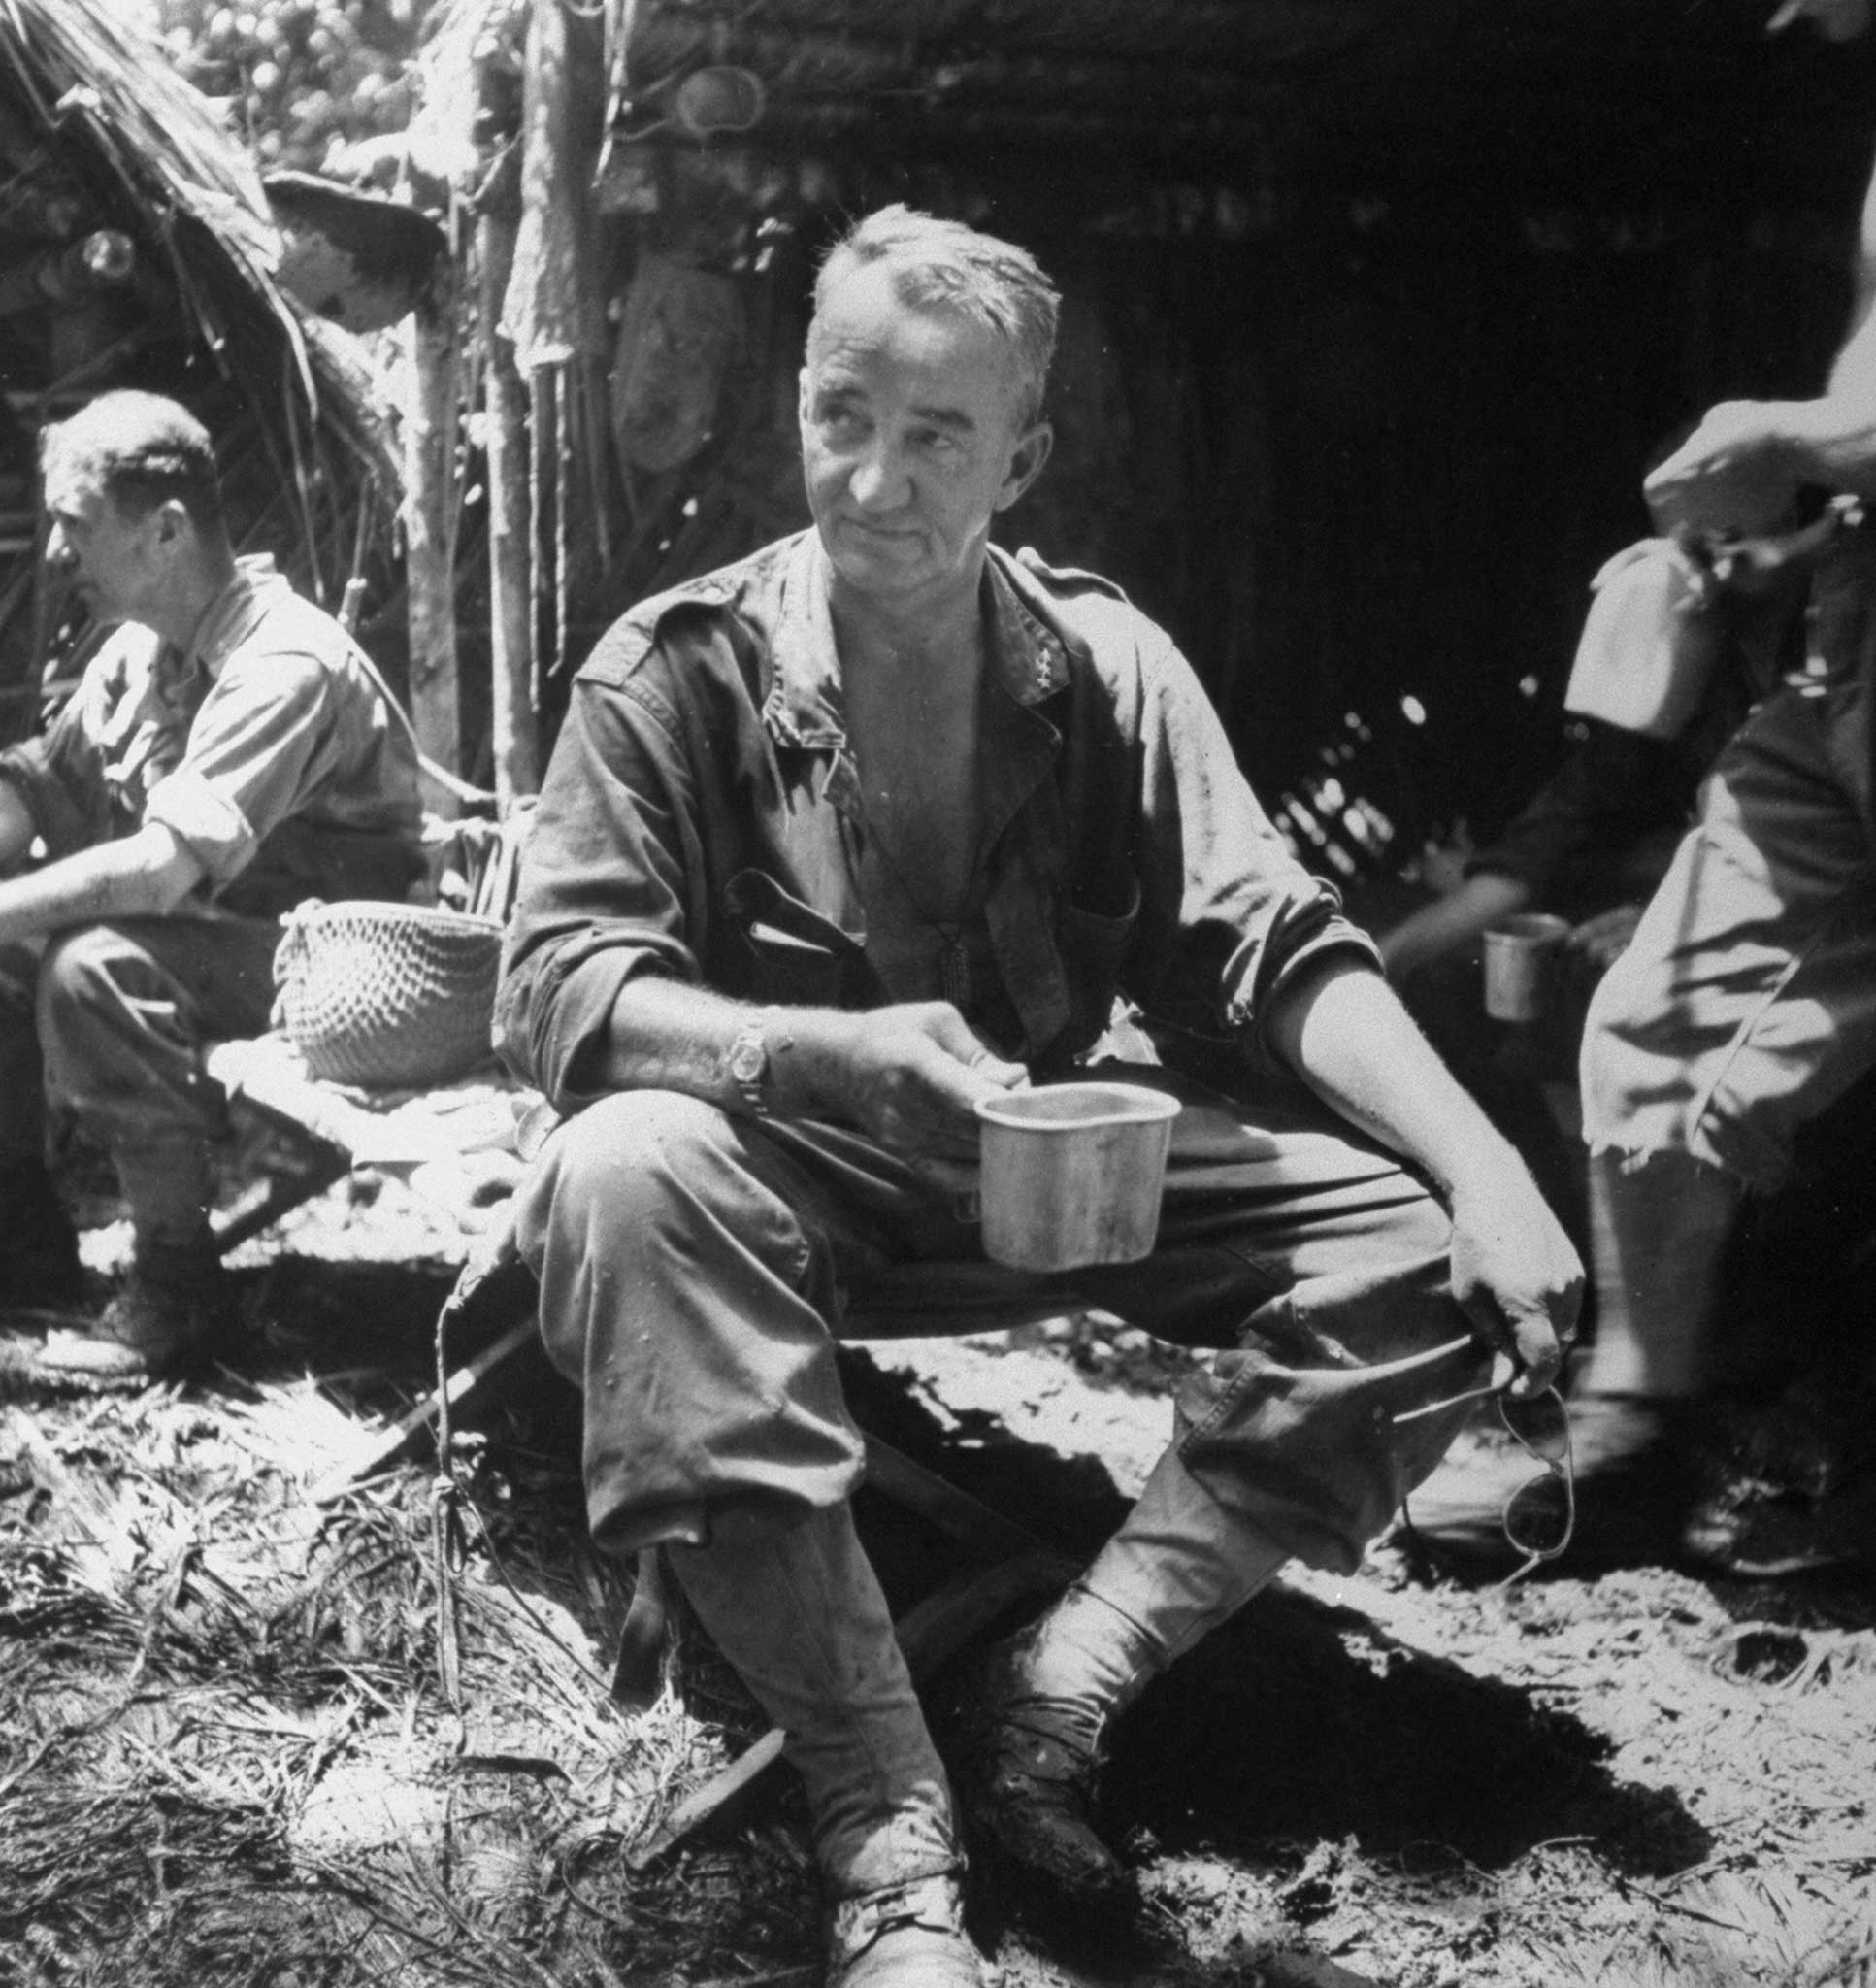 "At a medical collecting station Gen. Eichelberger stops for tea. Soon he was on his way again, walking toward the Buna front through mud to his knees."